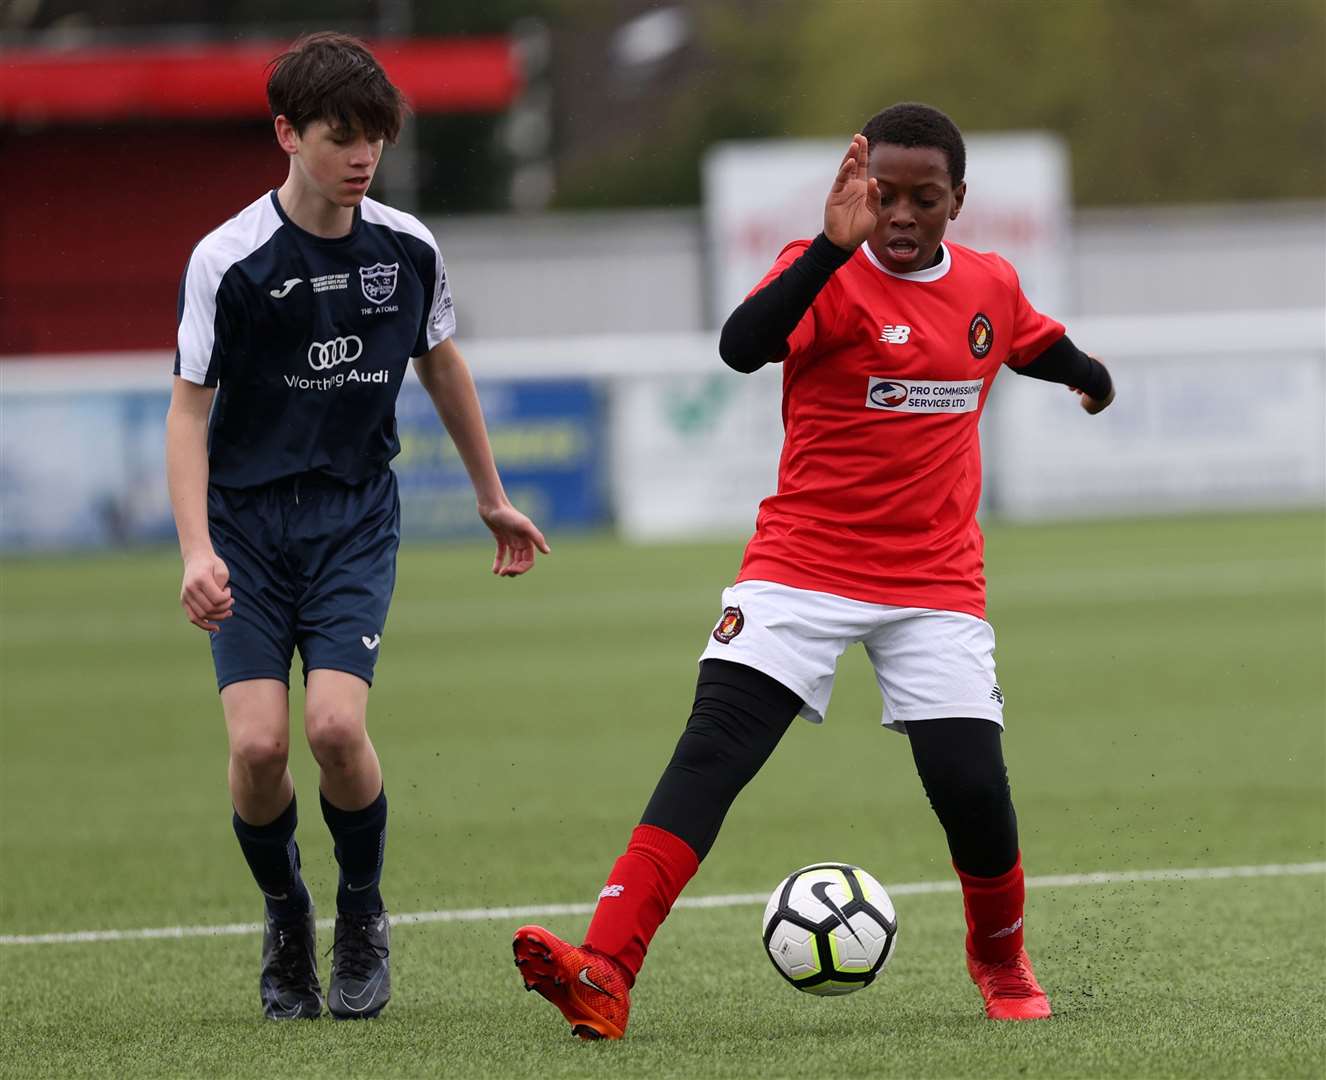 Ebbsfleet under-13s are closed down by AFC Worthing. Picture: PSP Images